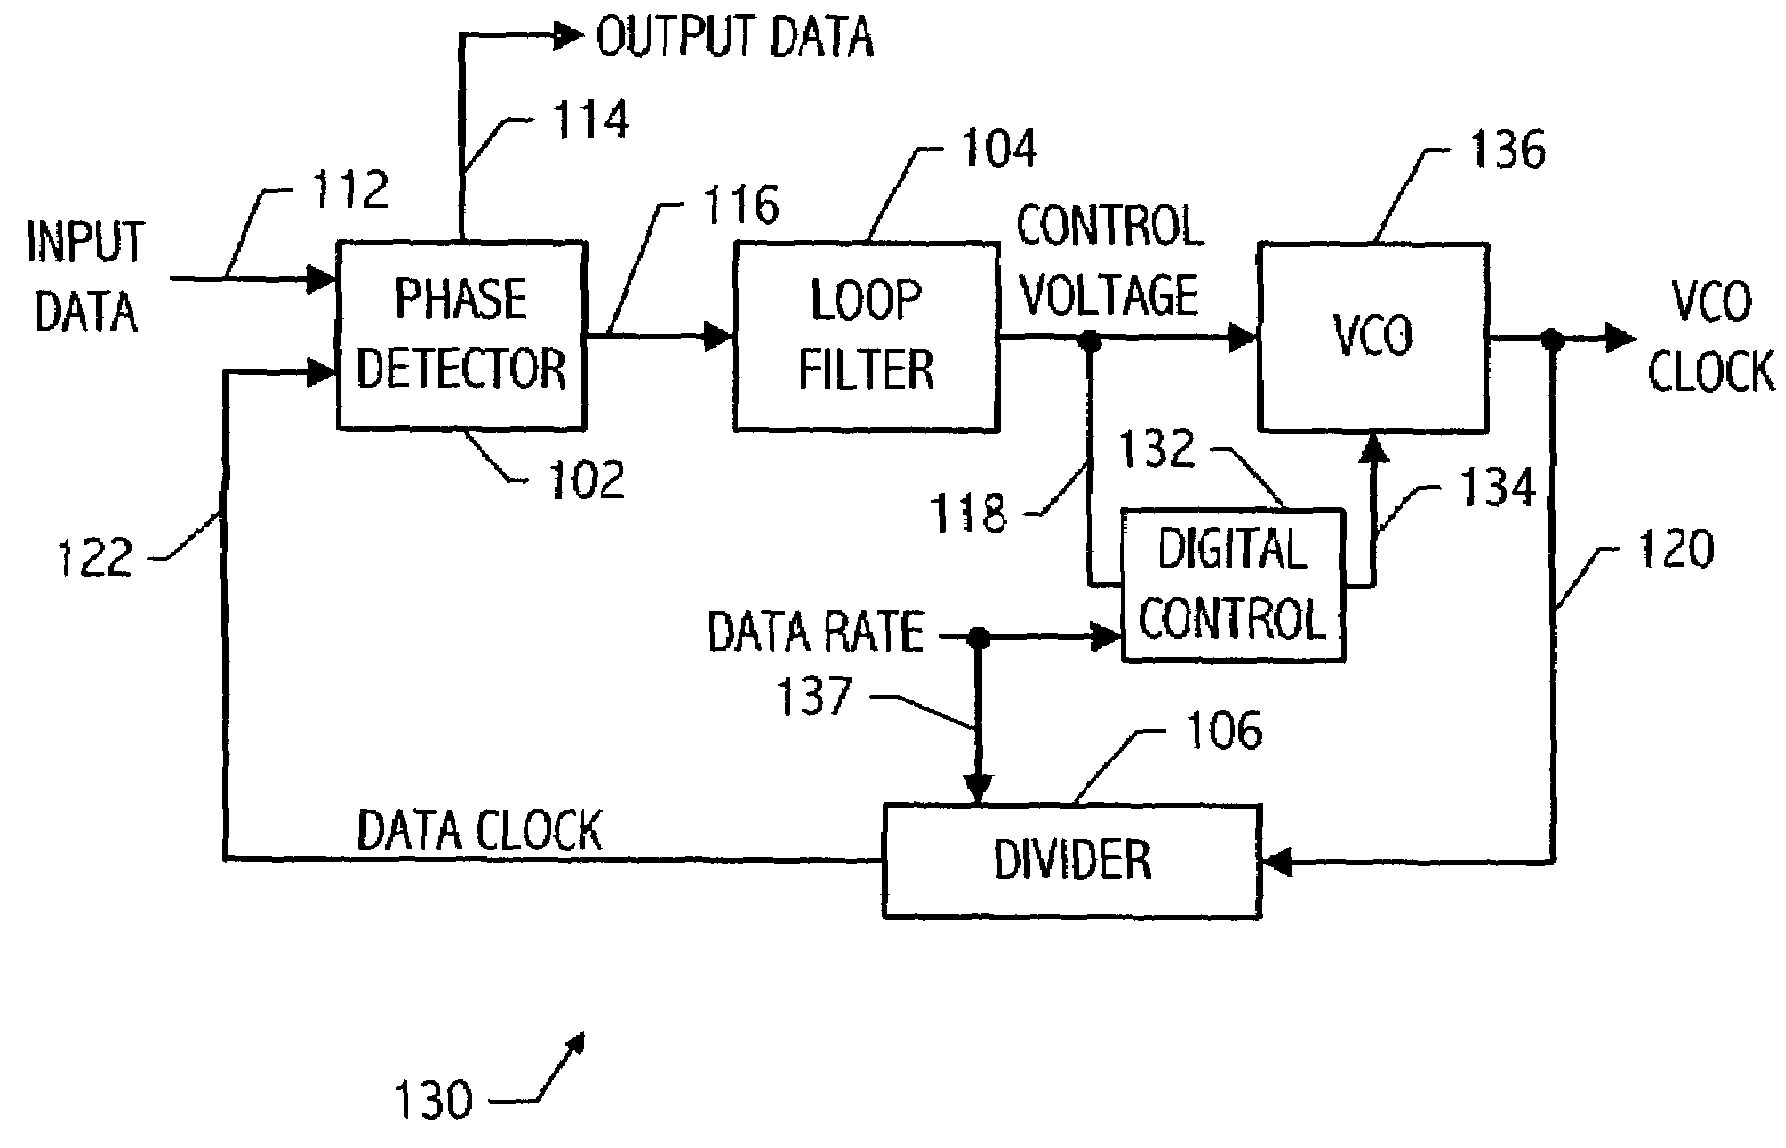 Feedback system incorporating slow digital switching for glitch-free state changes